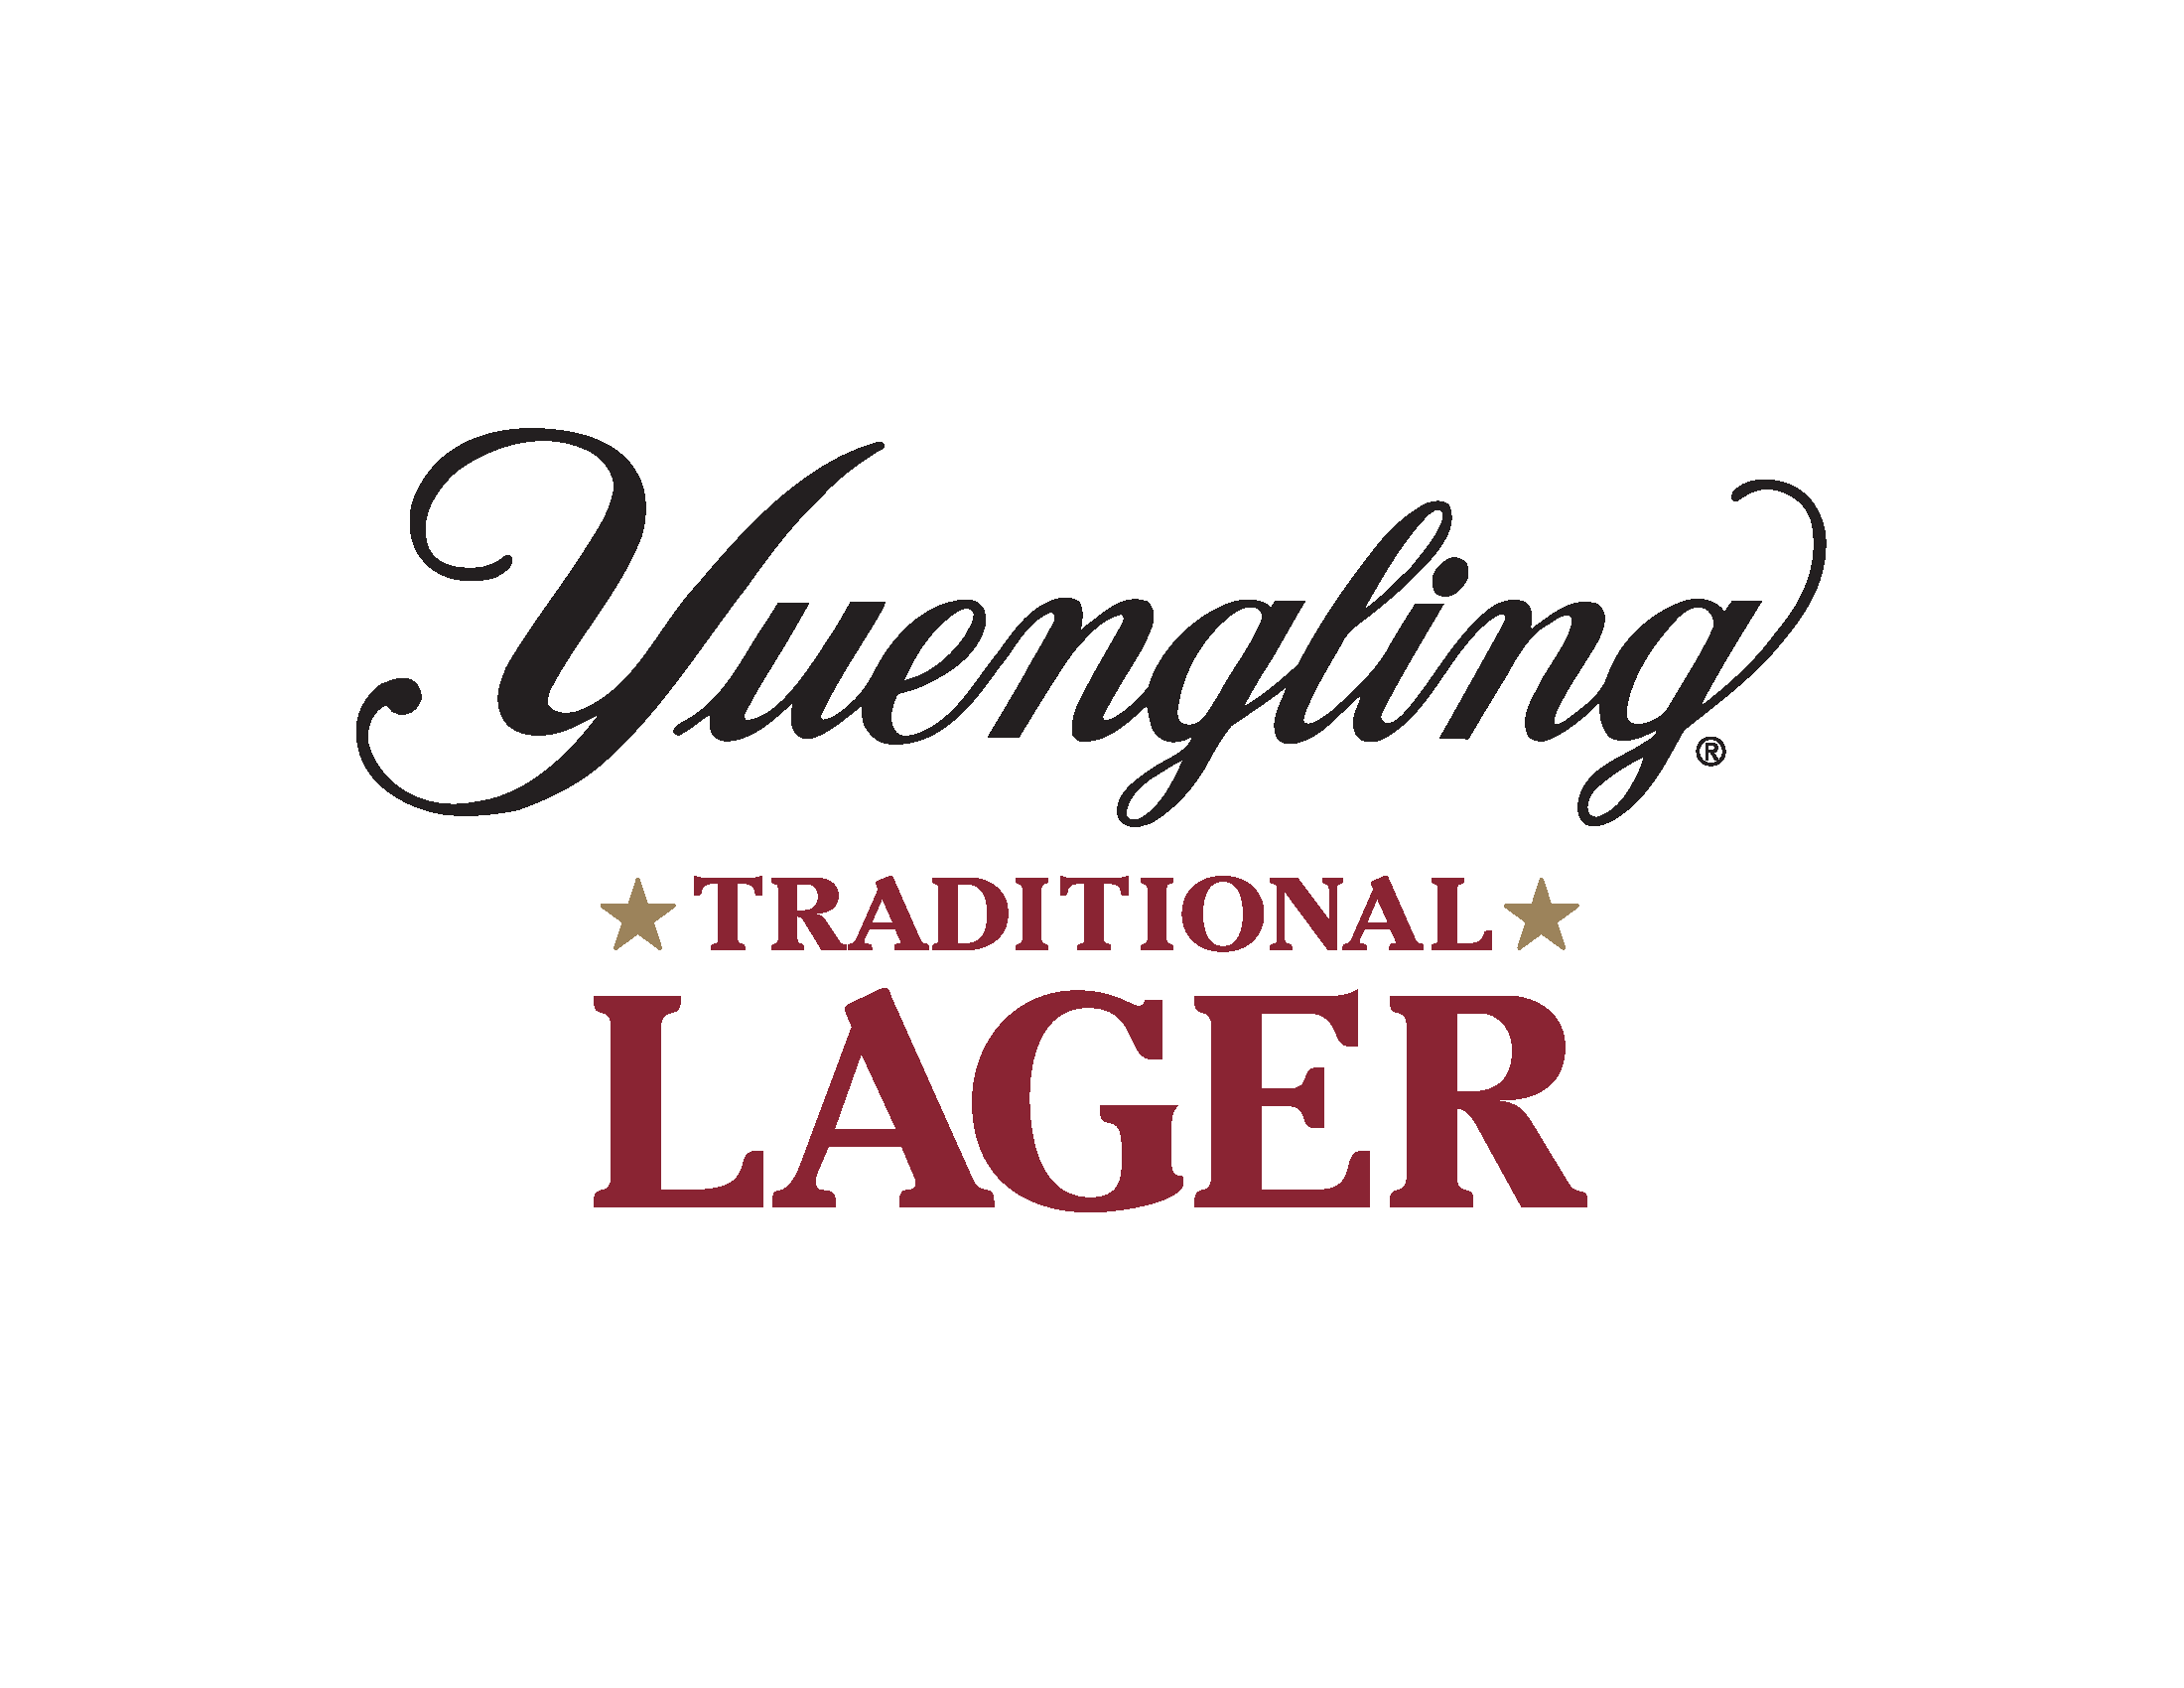 Yueng_Lager_Full color.png